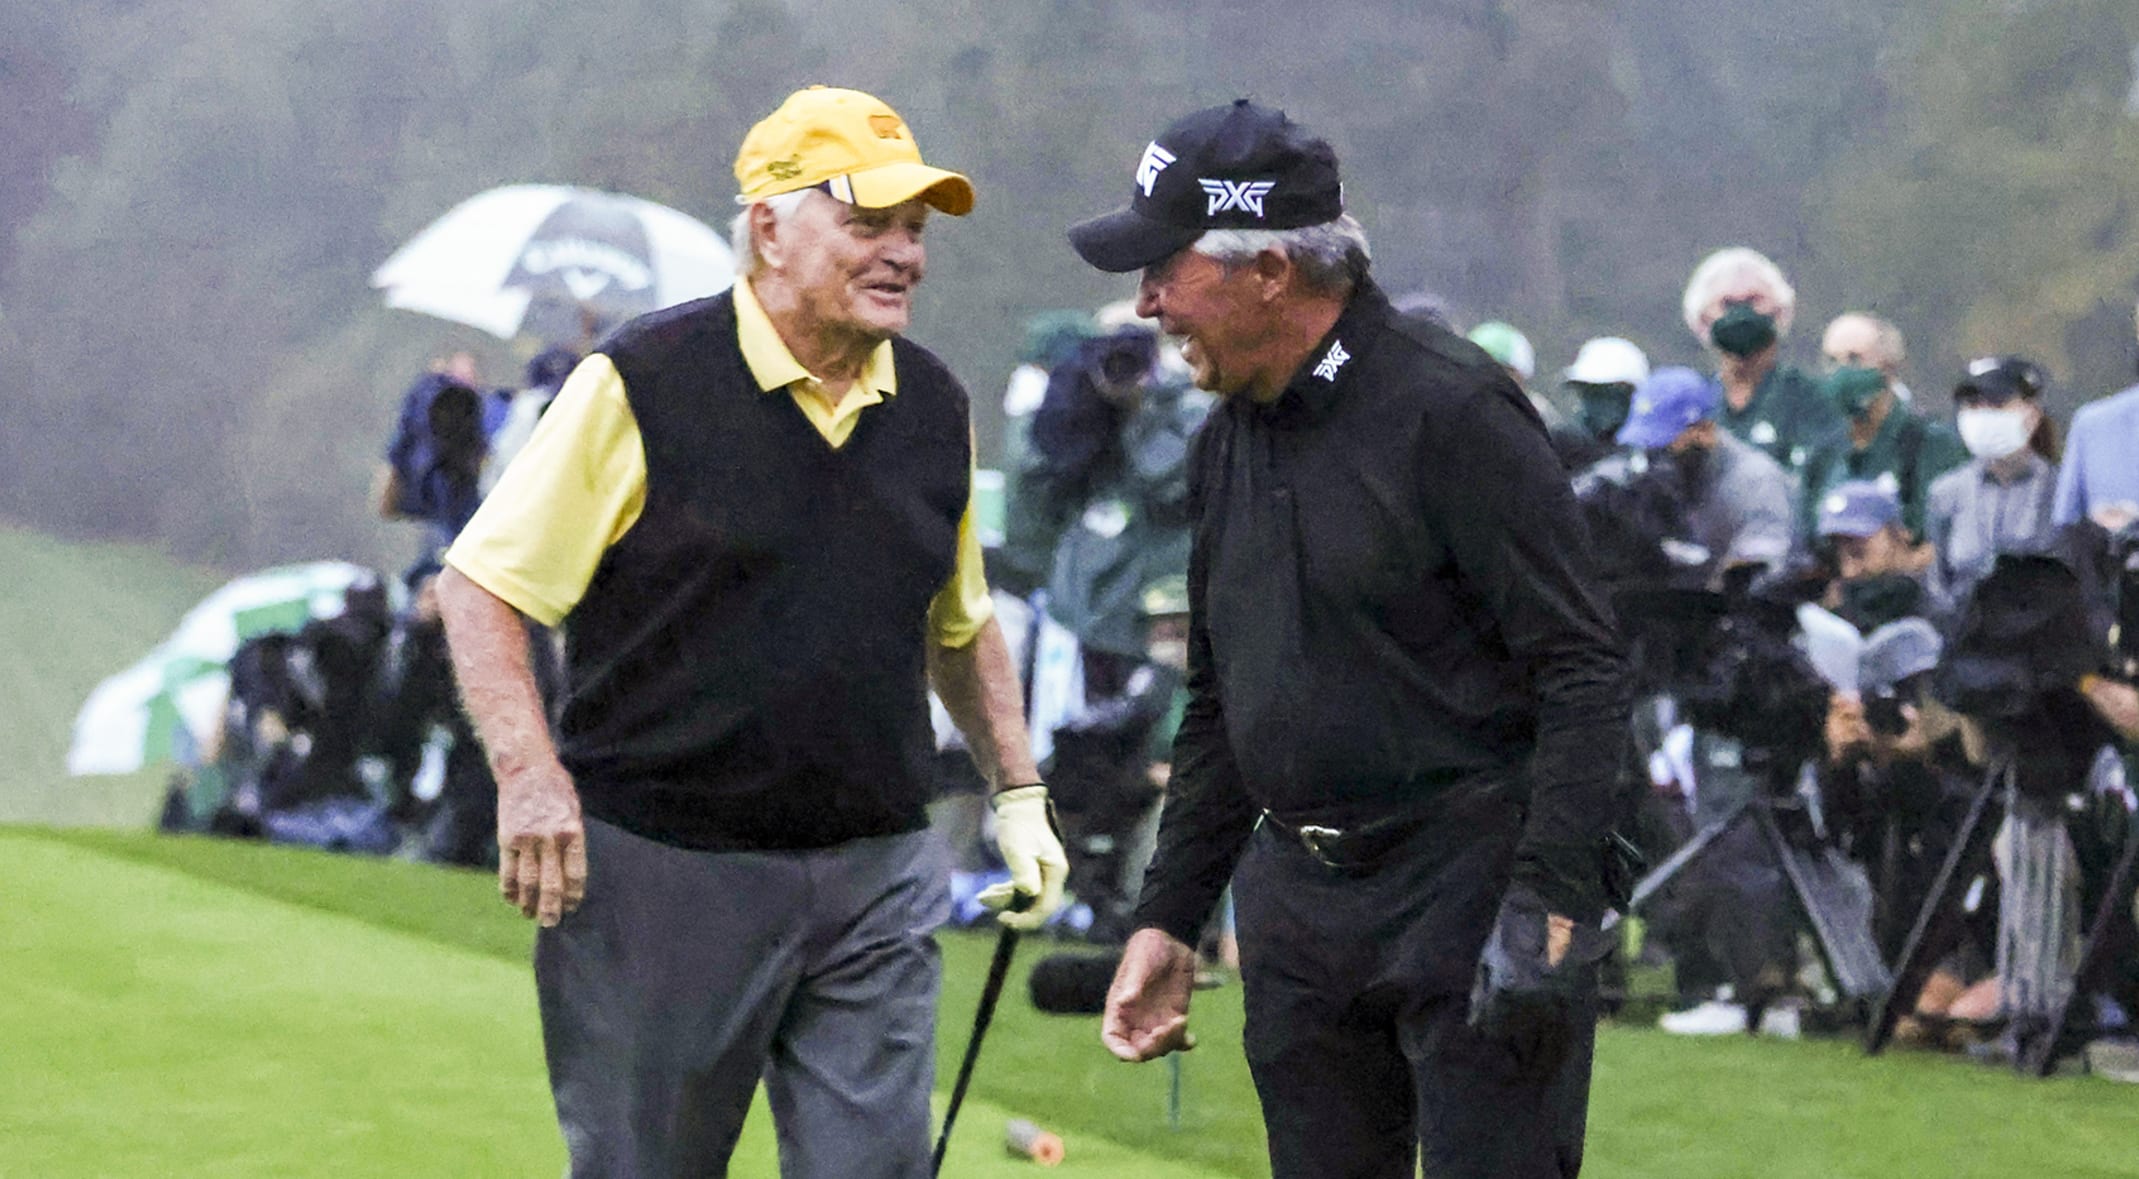 Gary Player Jack Nicklaus Hit Ceremonial First Tee Shots